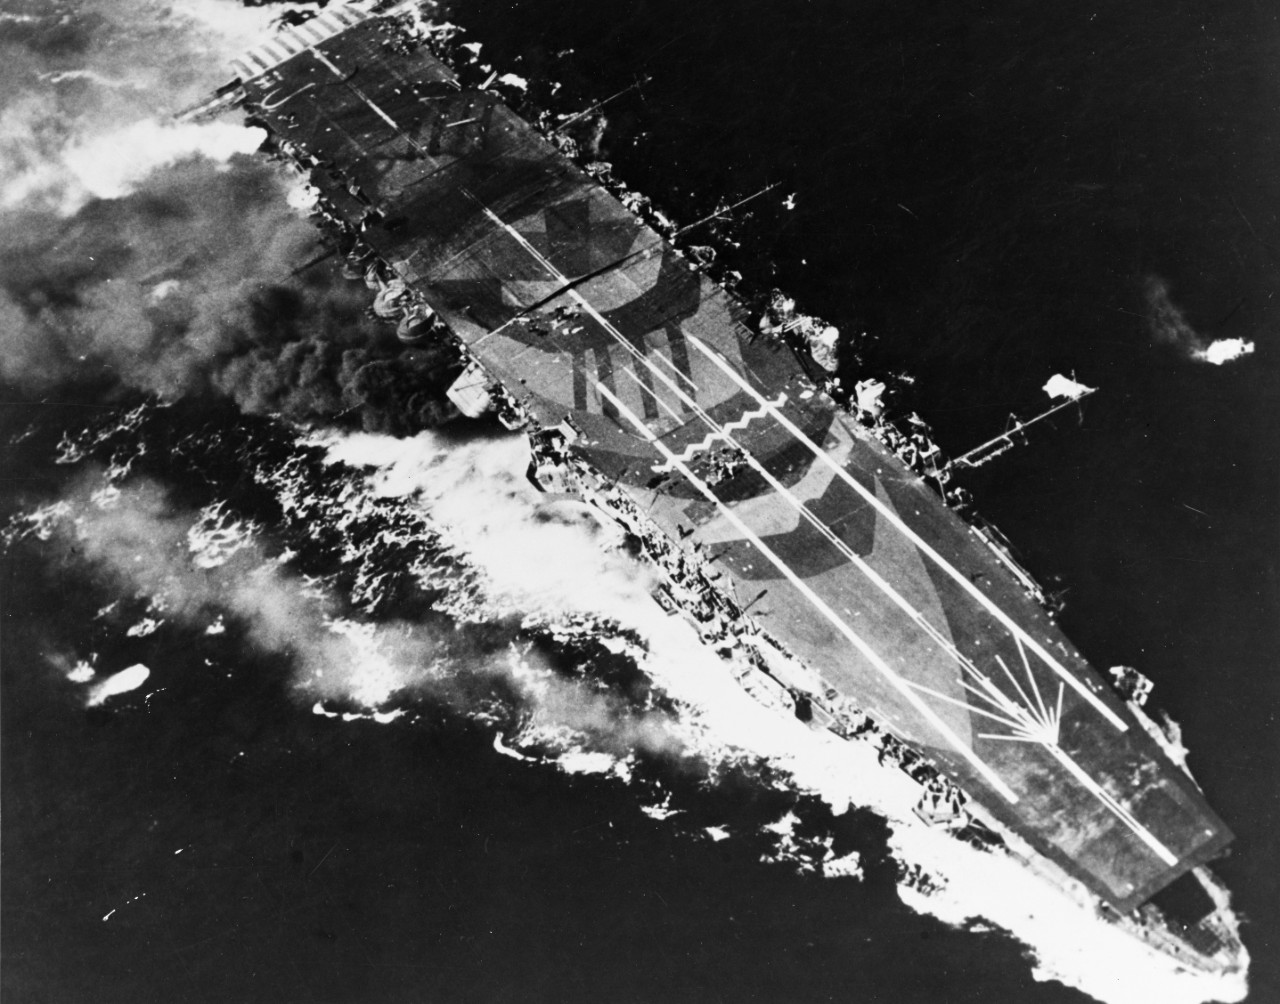 Japanese aircraft carrier Zuiho under attack by planes from USS Enterprise during the Battle off Cape Engano, 25 October 1944.